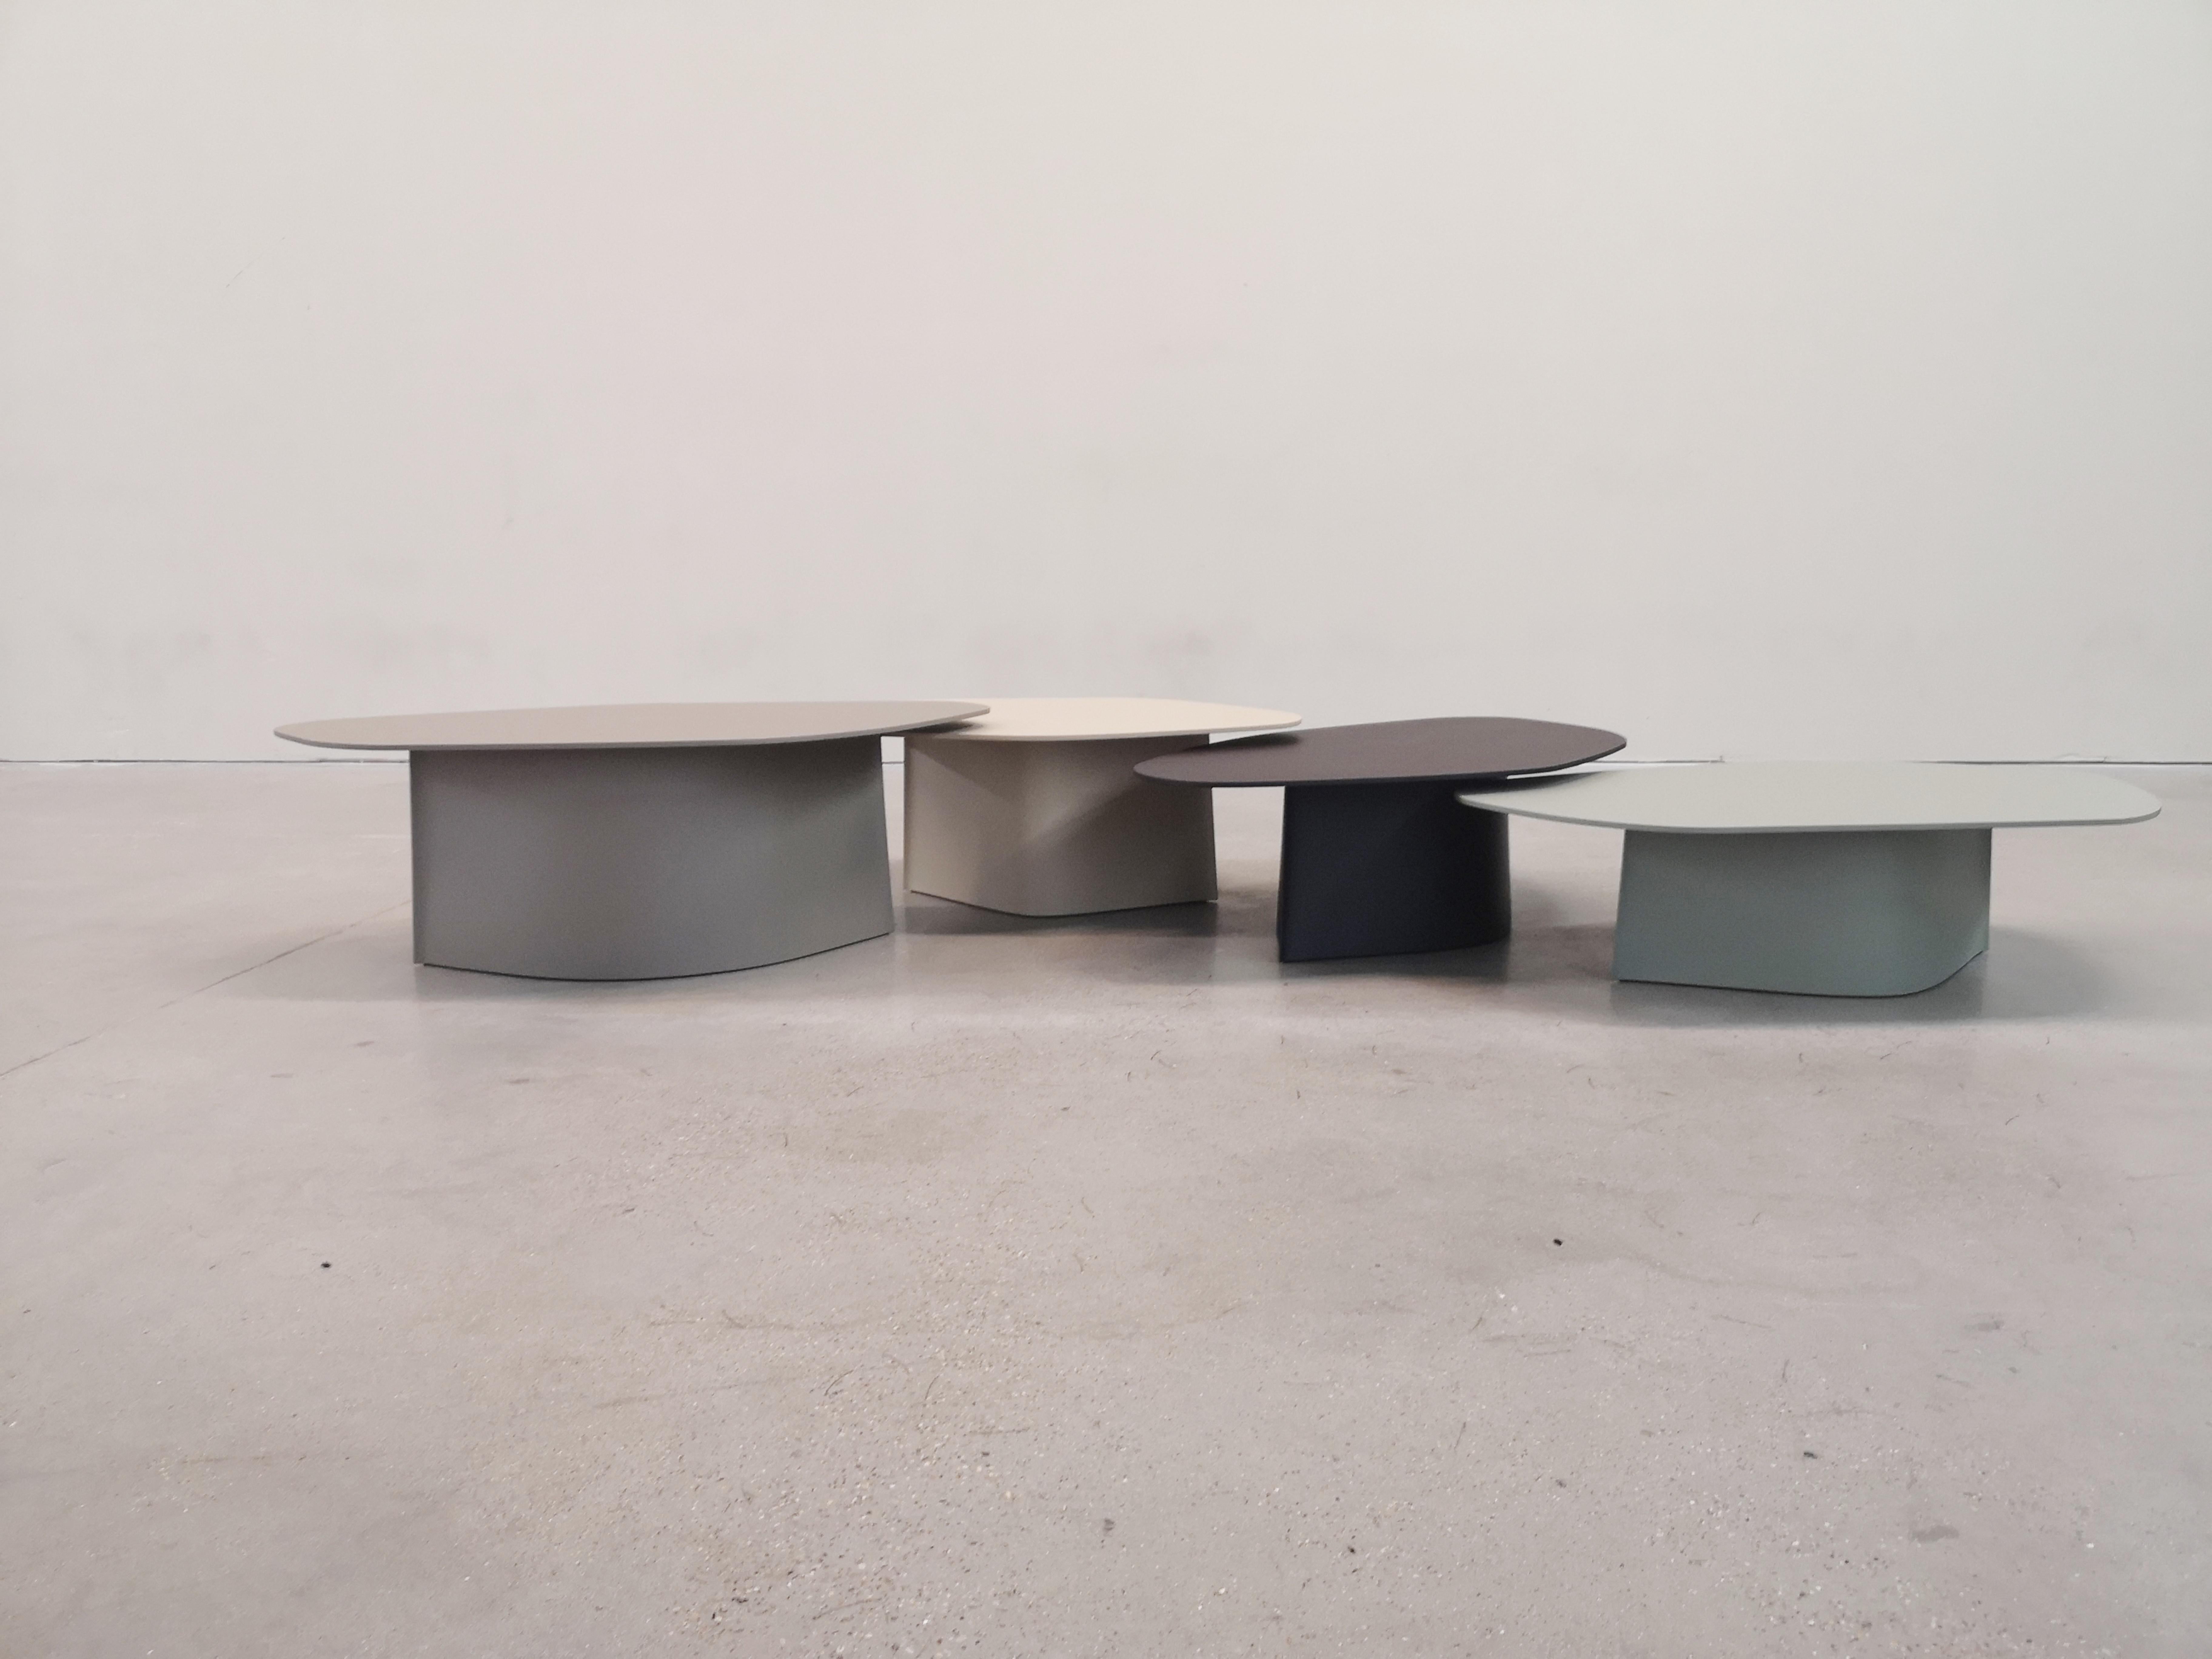 Polish Contemporary Coffee Tables 'Parova' 'Together or Separately' by Zieta